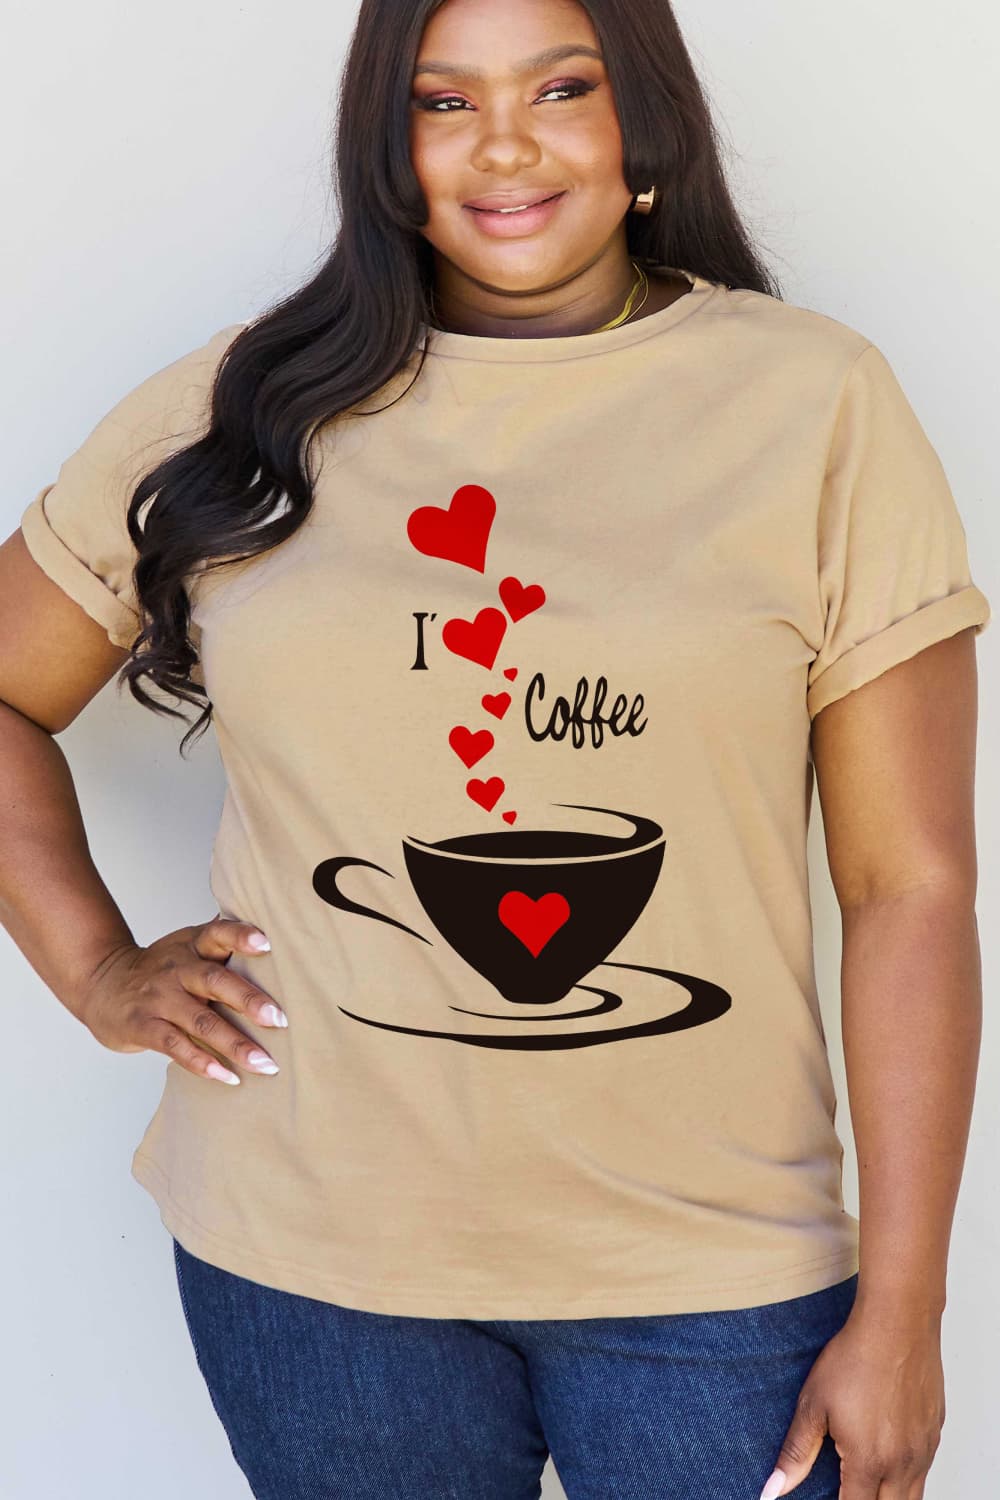 Simply Love Full Size I LOVE COFFEE Graphic Cotton Tee free shipping -Oh Em Gee Boutique